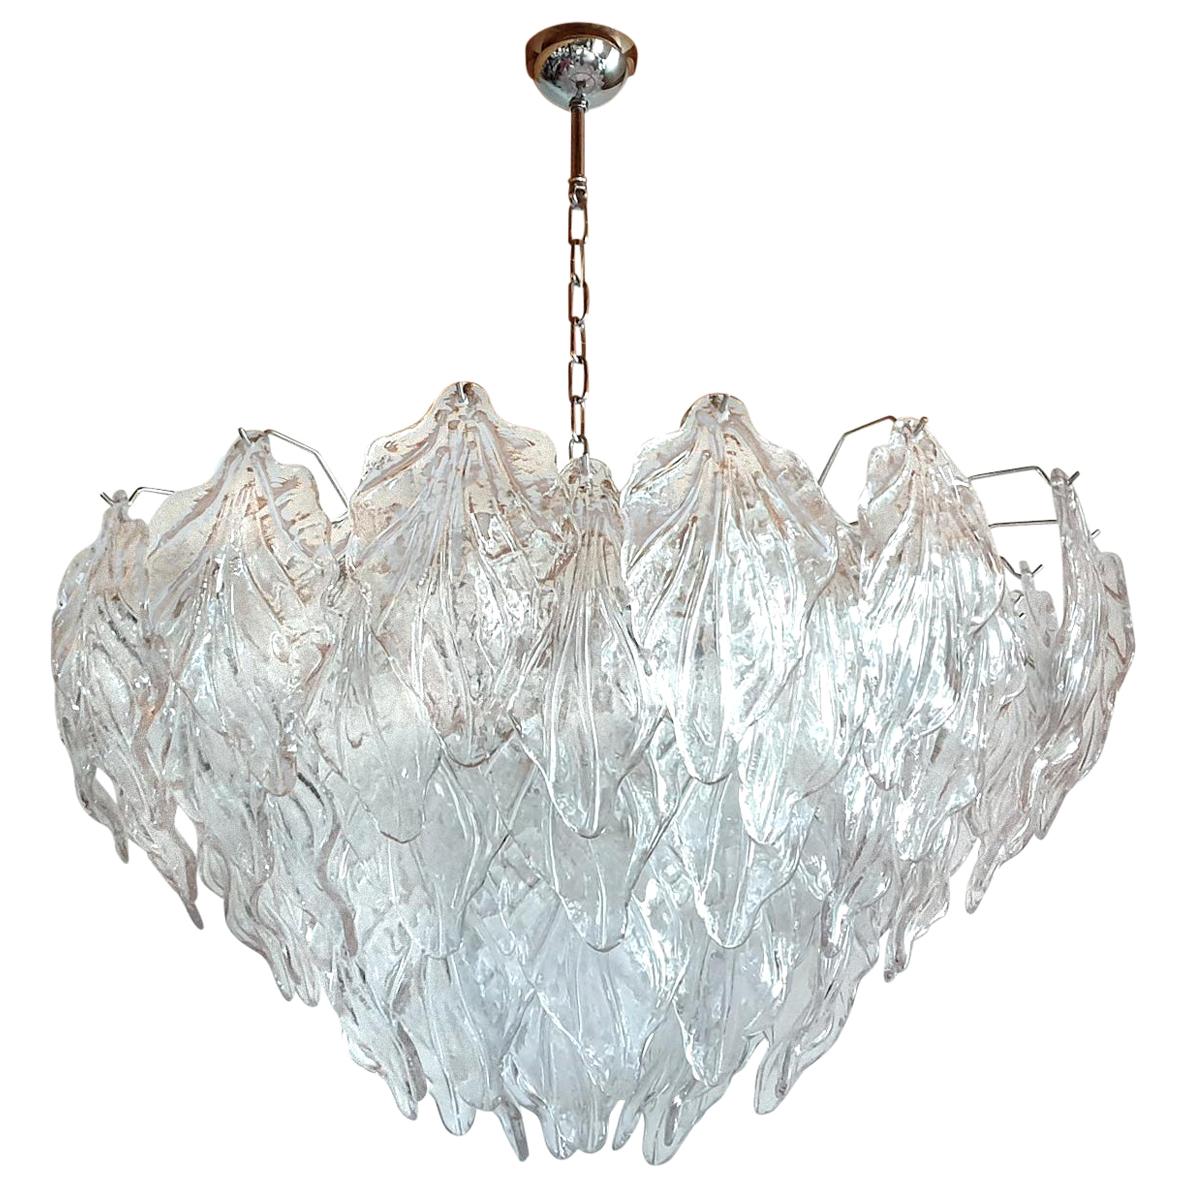 Large Clear Murano Glass Leaves Mid-Century Modern Chandelier, Barovier Style